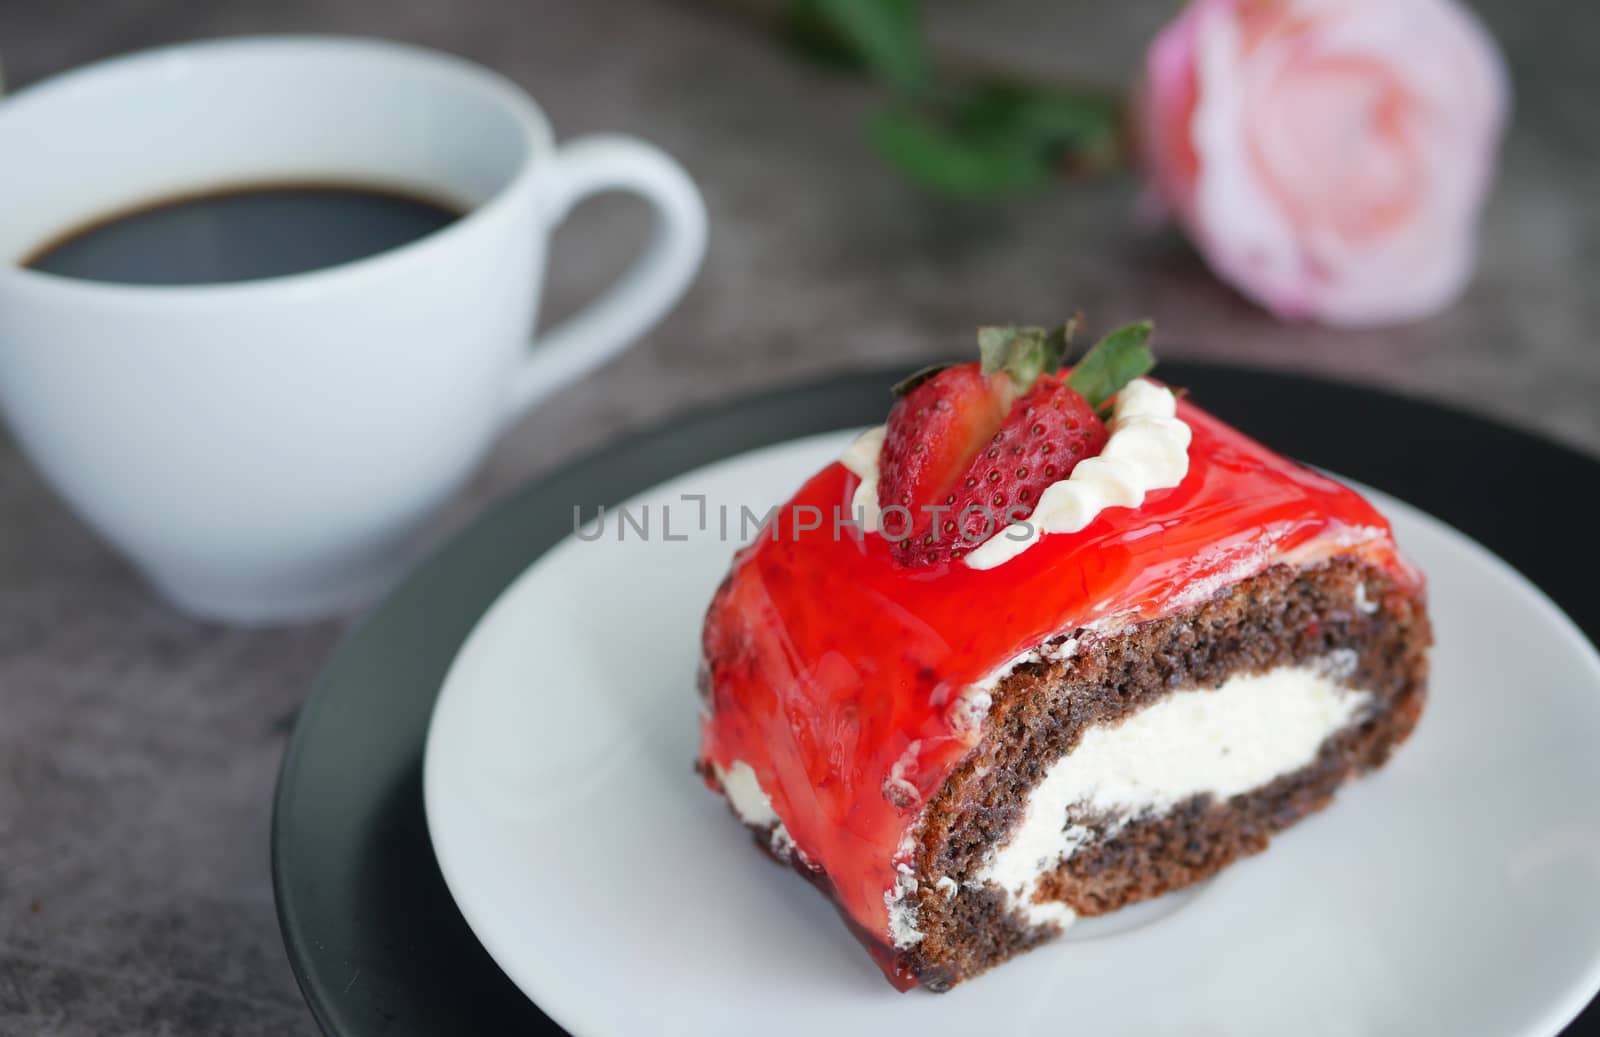 chocolate cake with strawberry jam sauce topped with whipped cream and fresh strawberry chopped served on white plate with a cup of black coffee, blur rose at background by asiandelight